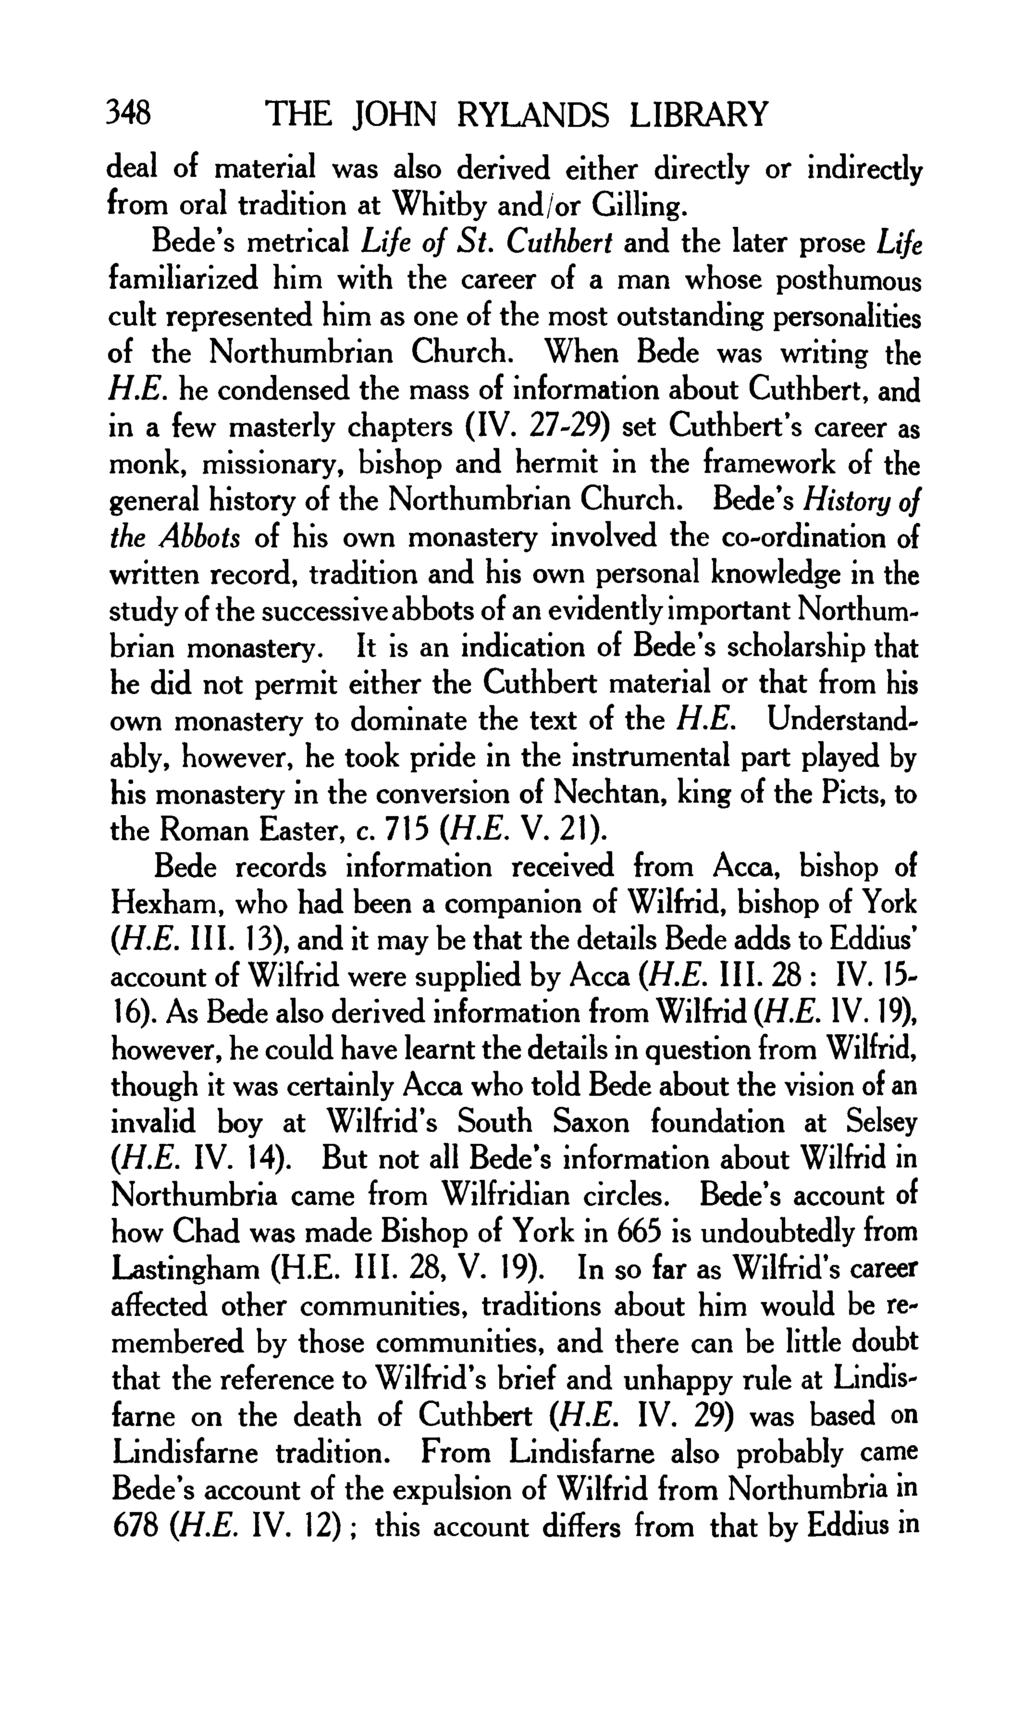 348 THE JOHN RYLANDS LIBRARY deal of material was also derived either directly or indirectly from oral tradition at Whitby and/or Gilling. Bede's metrical Life of St.